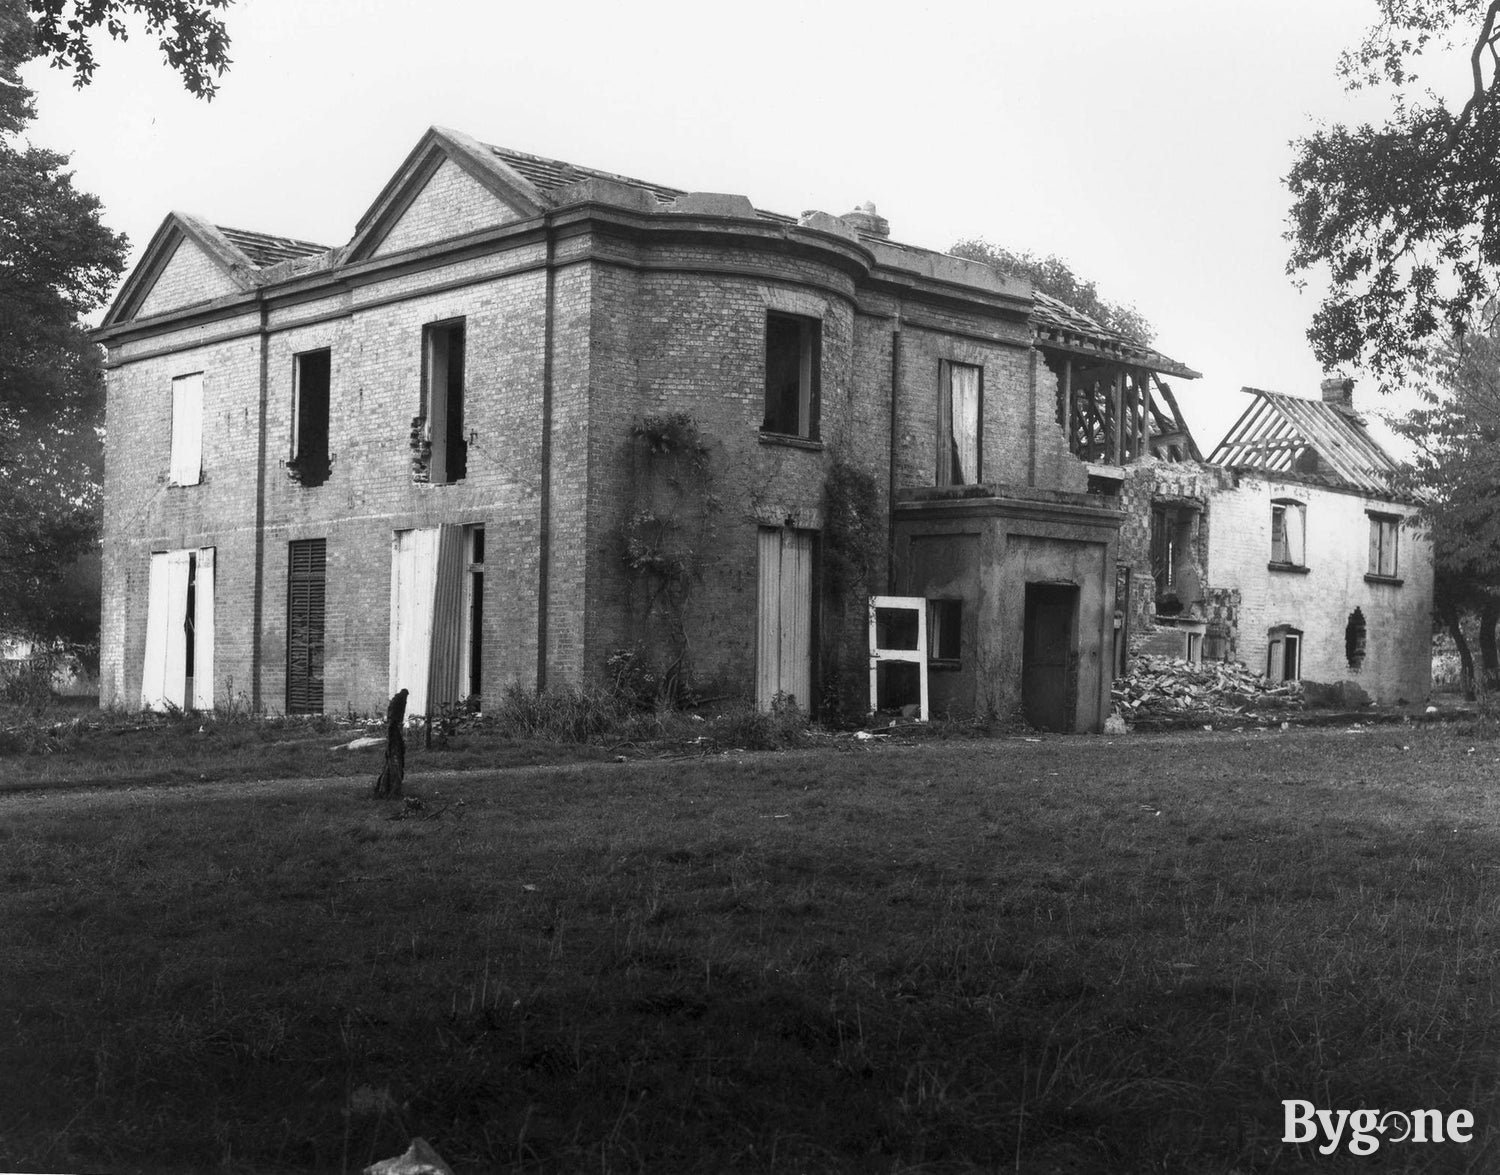 Paulsgrove House during demolition, 1970